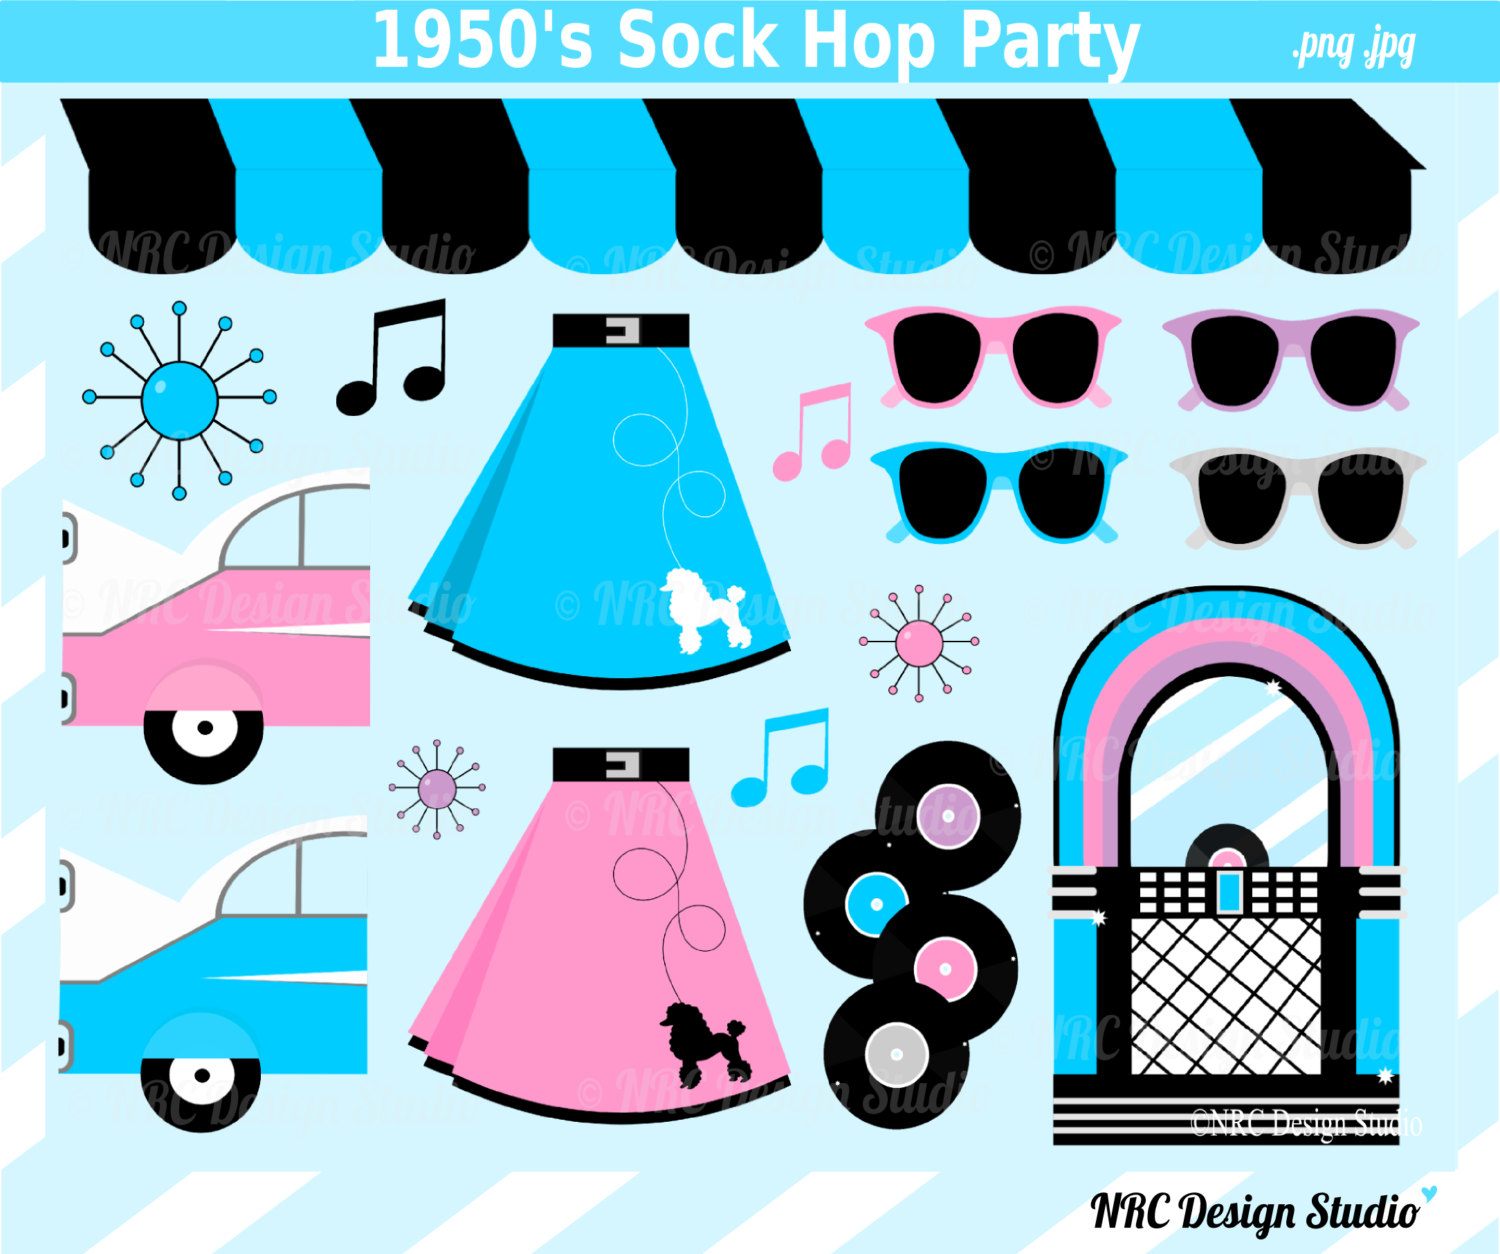 1950s Poodle Skirt Clipart 